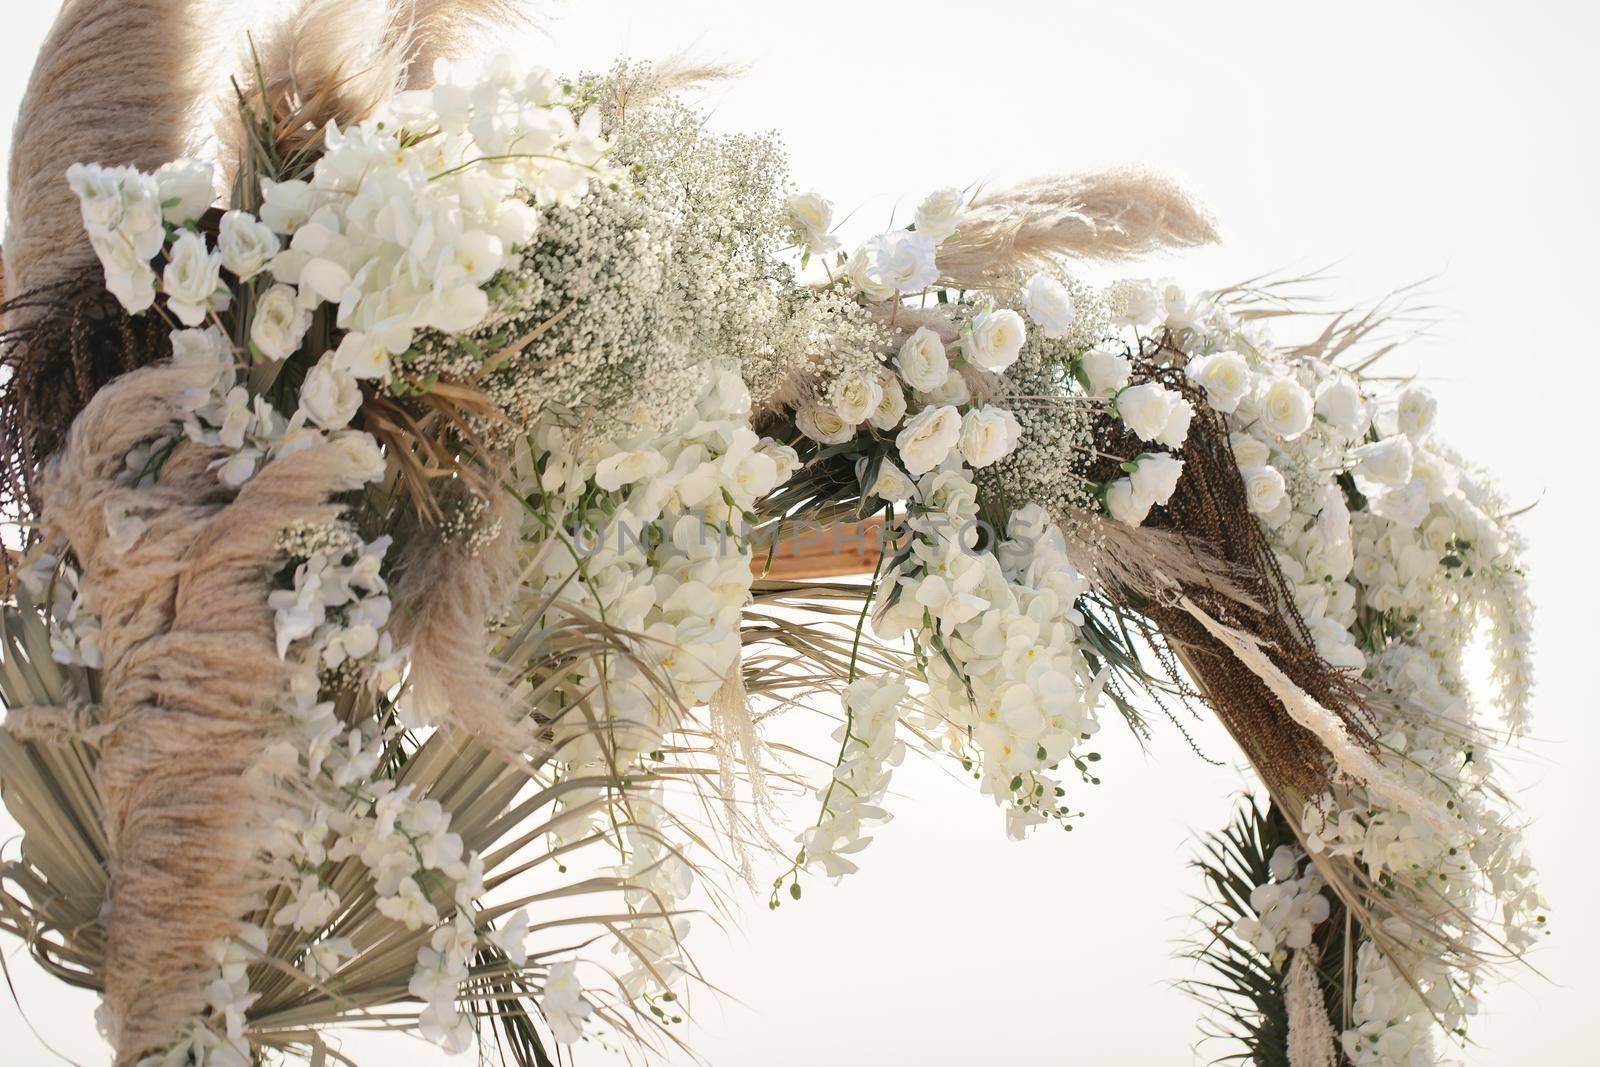 Fresh flowers and dried flowers on the wedding arch by StudioPeace